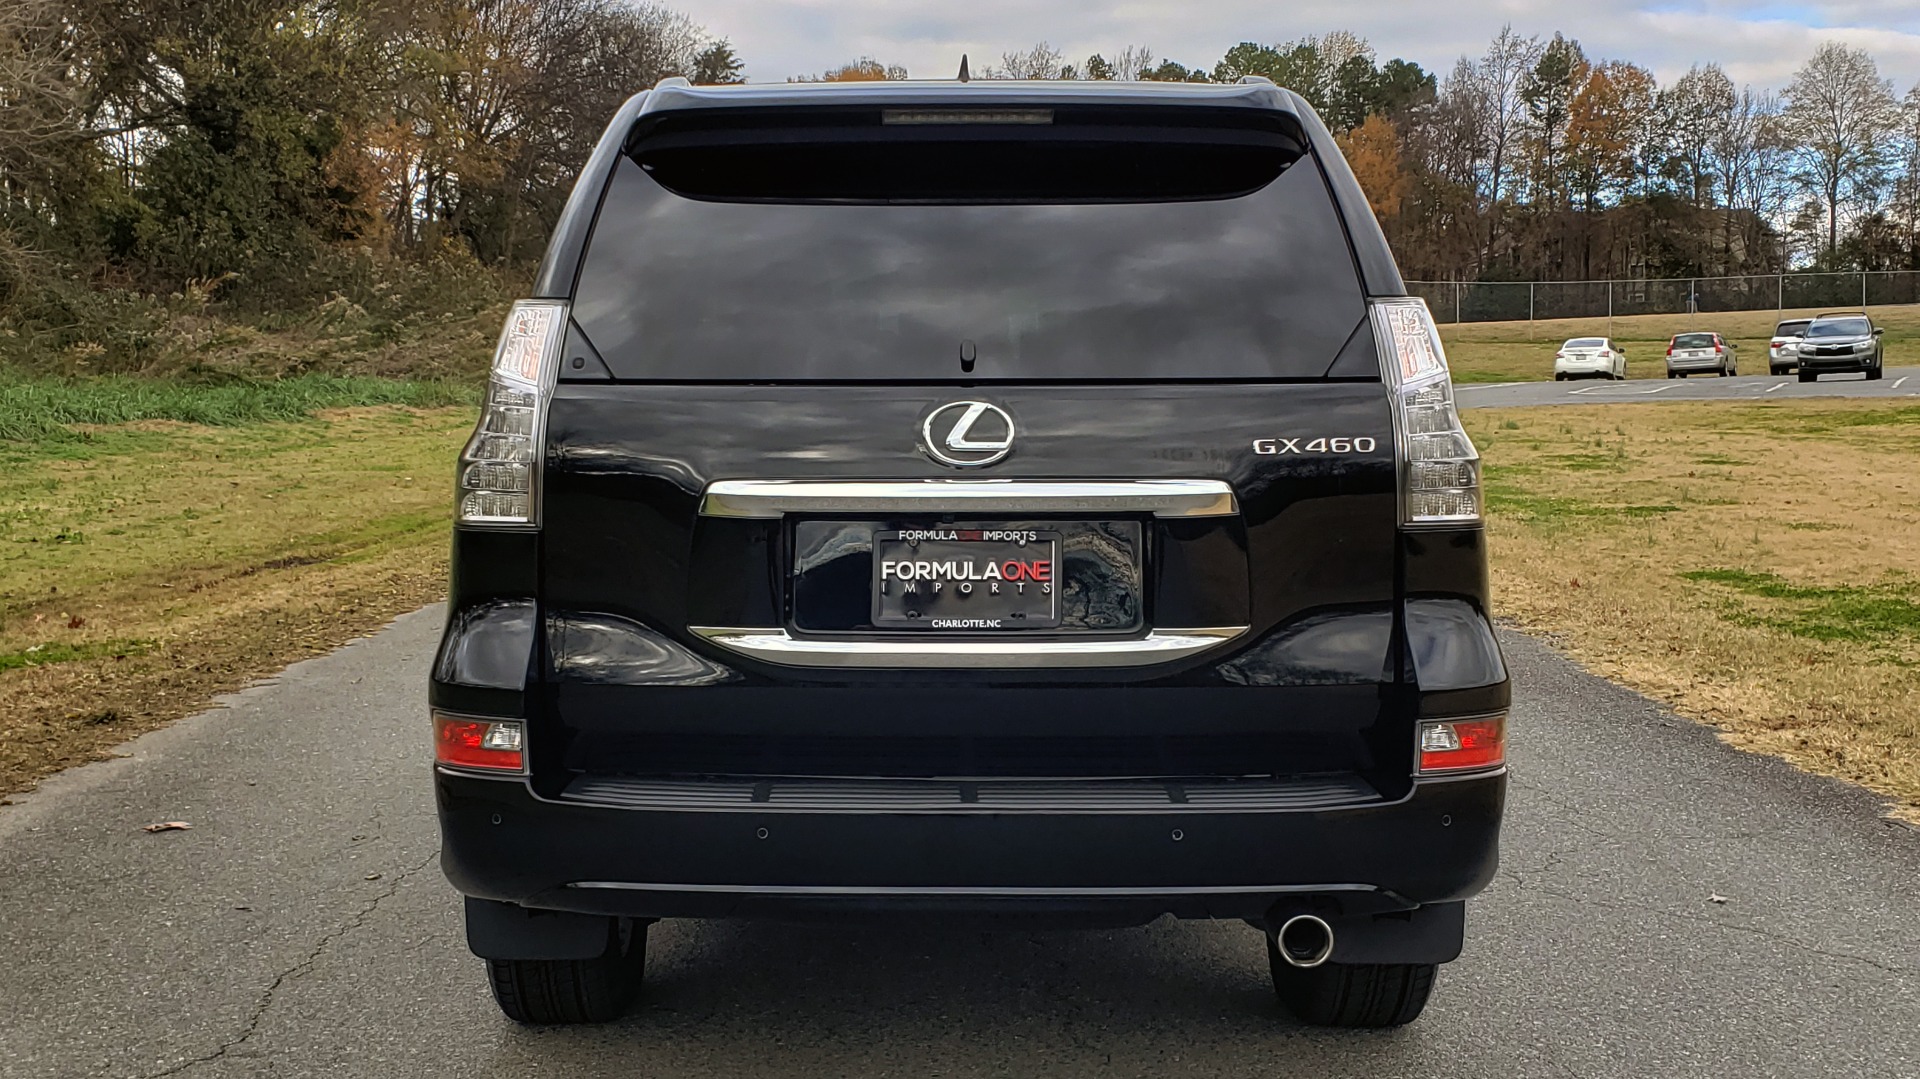 Used 2017 Lexus GX 460 PREMIUM / 4WD / NAV / SUNROOF / 3-ROW / BSM / REARVIEW for sale Sold at Formula Imports in Charlotte NC 28227 9